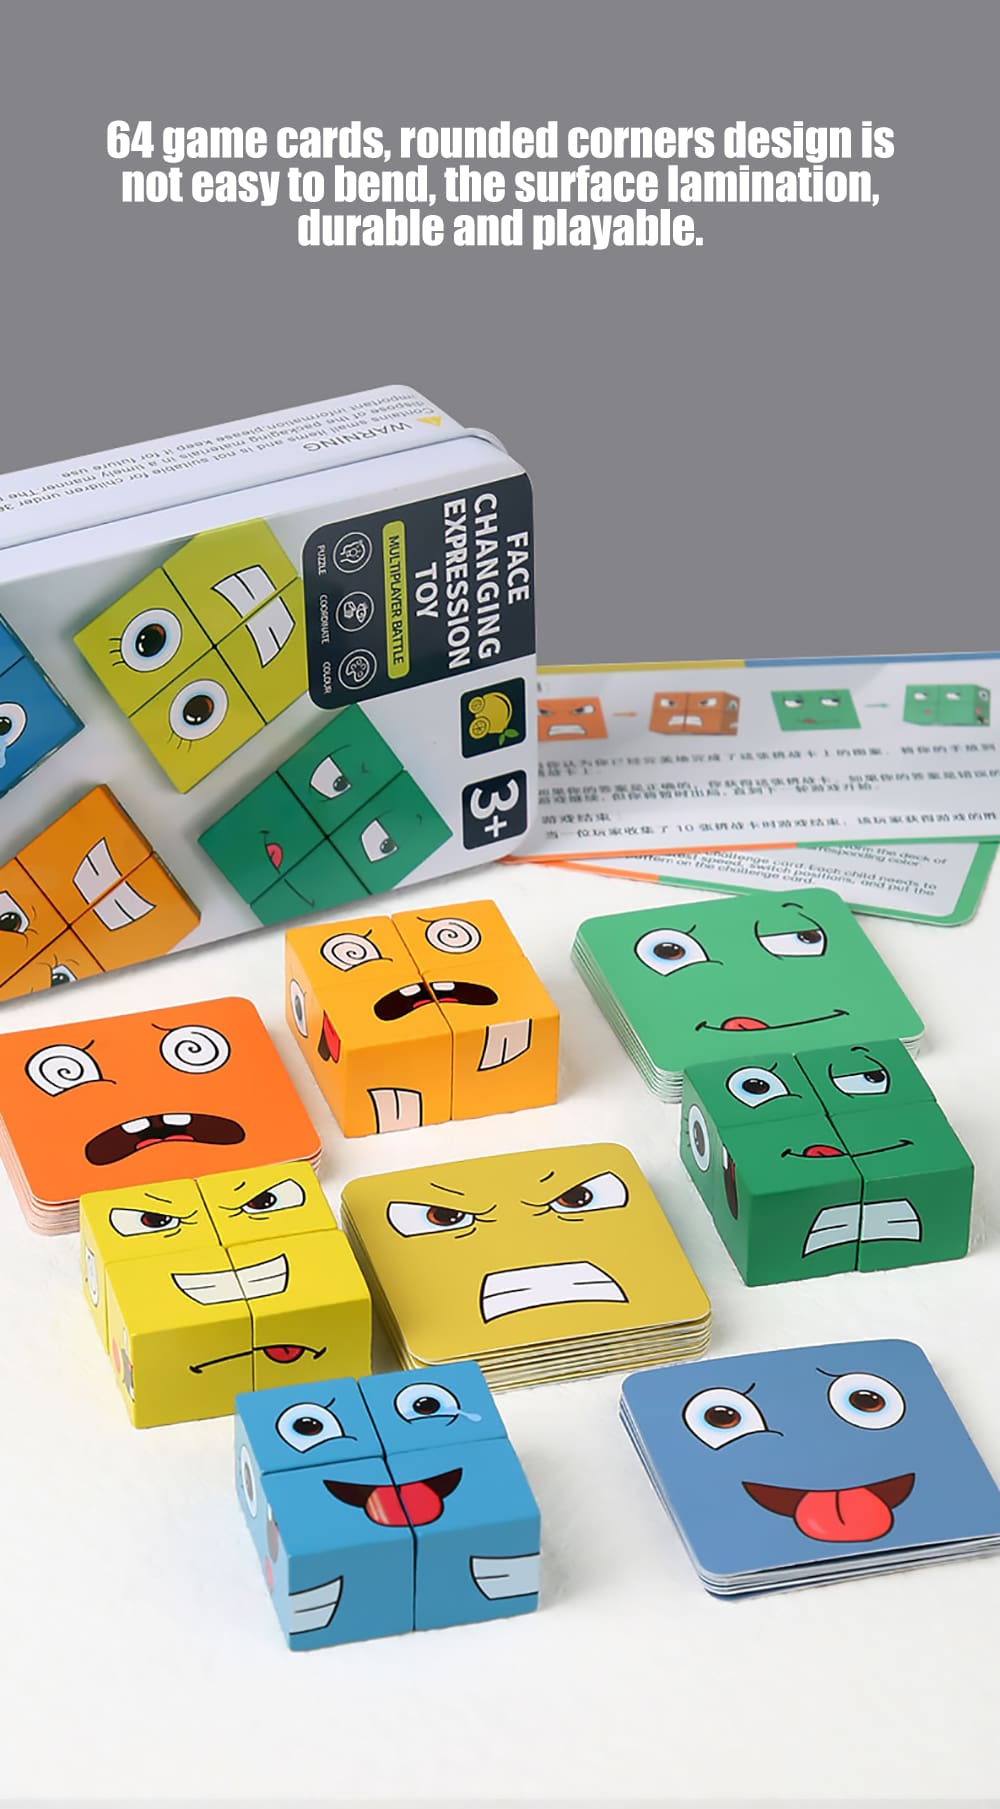 Face Expression Change Cube Game Toys